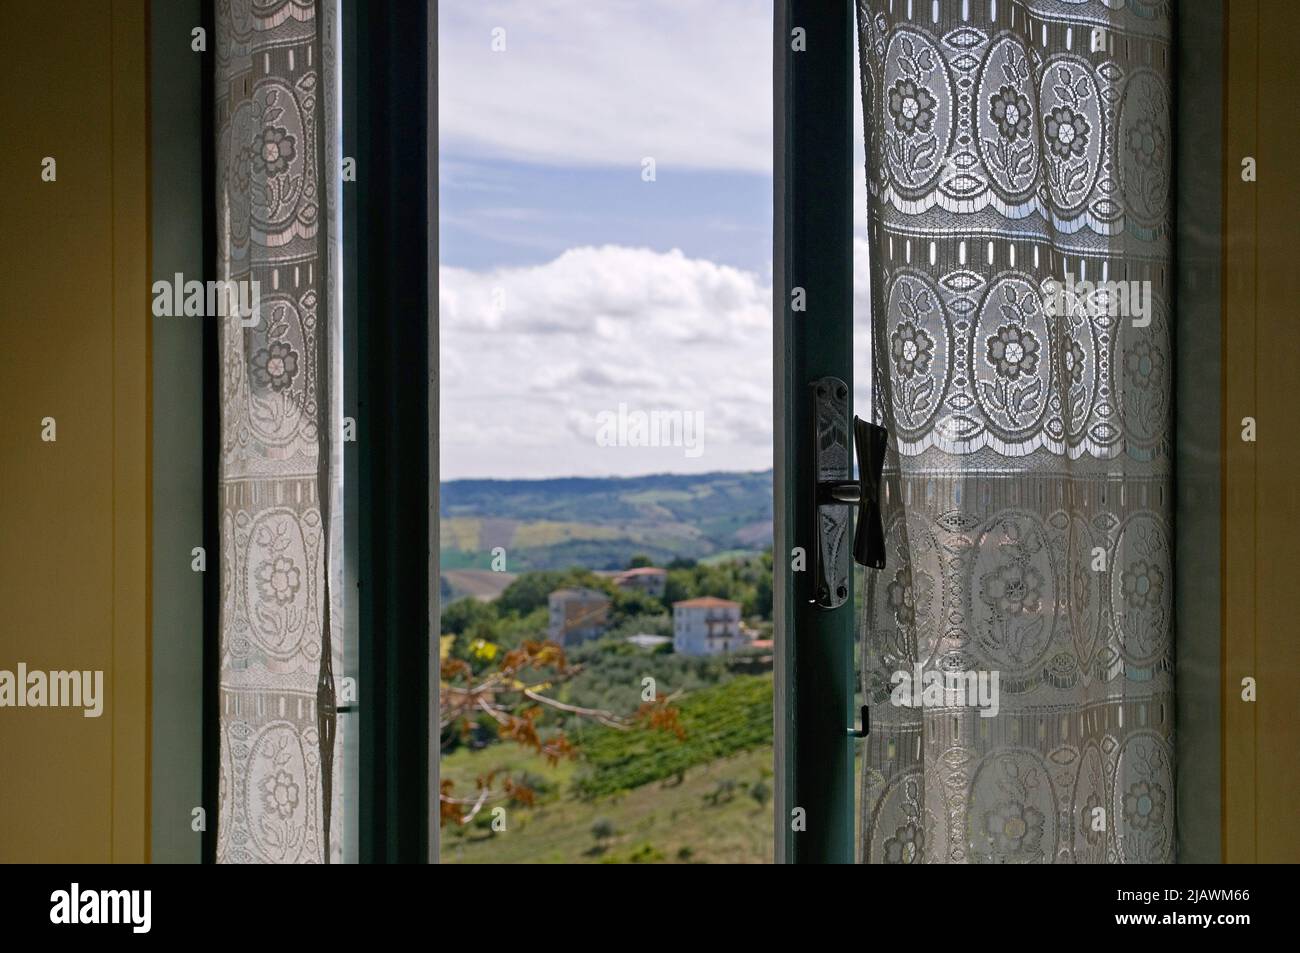 a window with a view on the countryside,  Fermo, Marche region, Italy Stock Photo